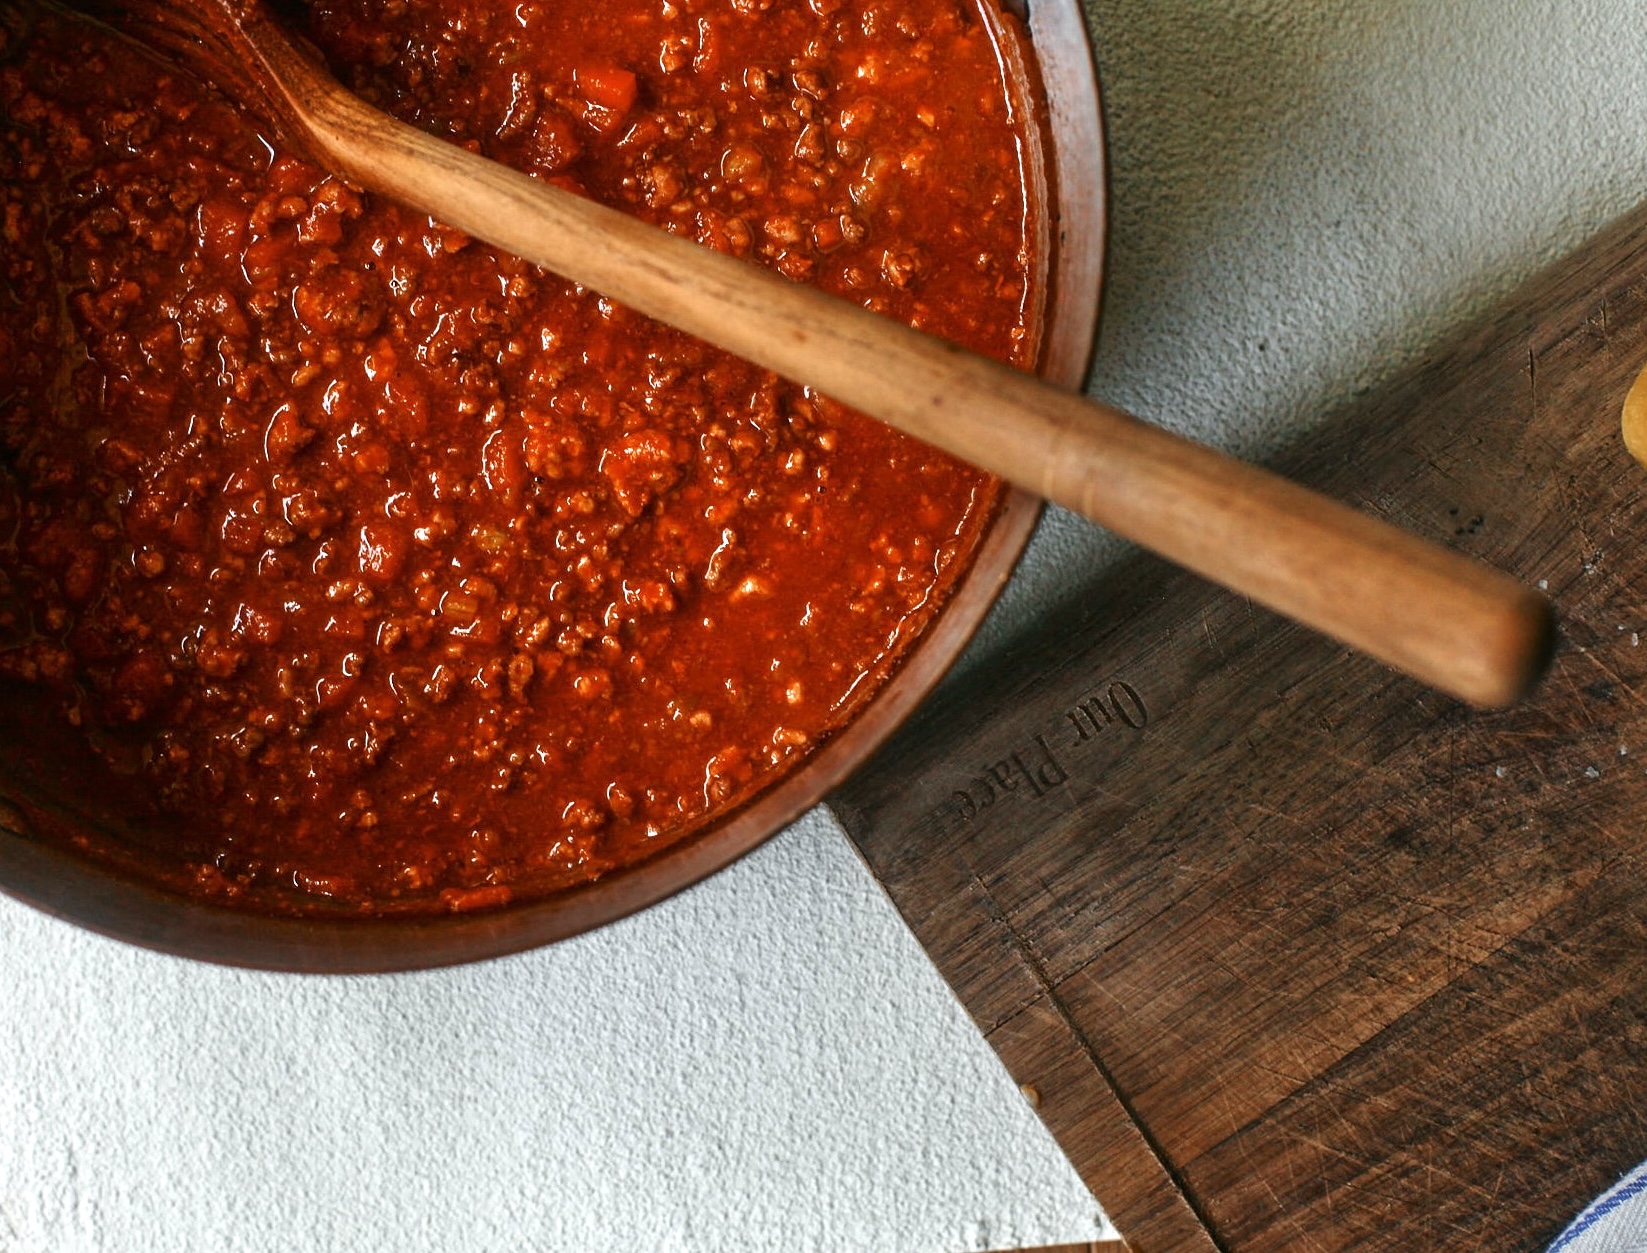 bolognese sauce in the pot